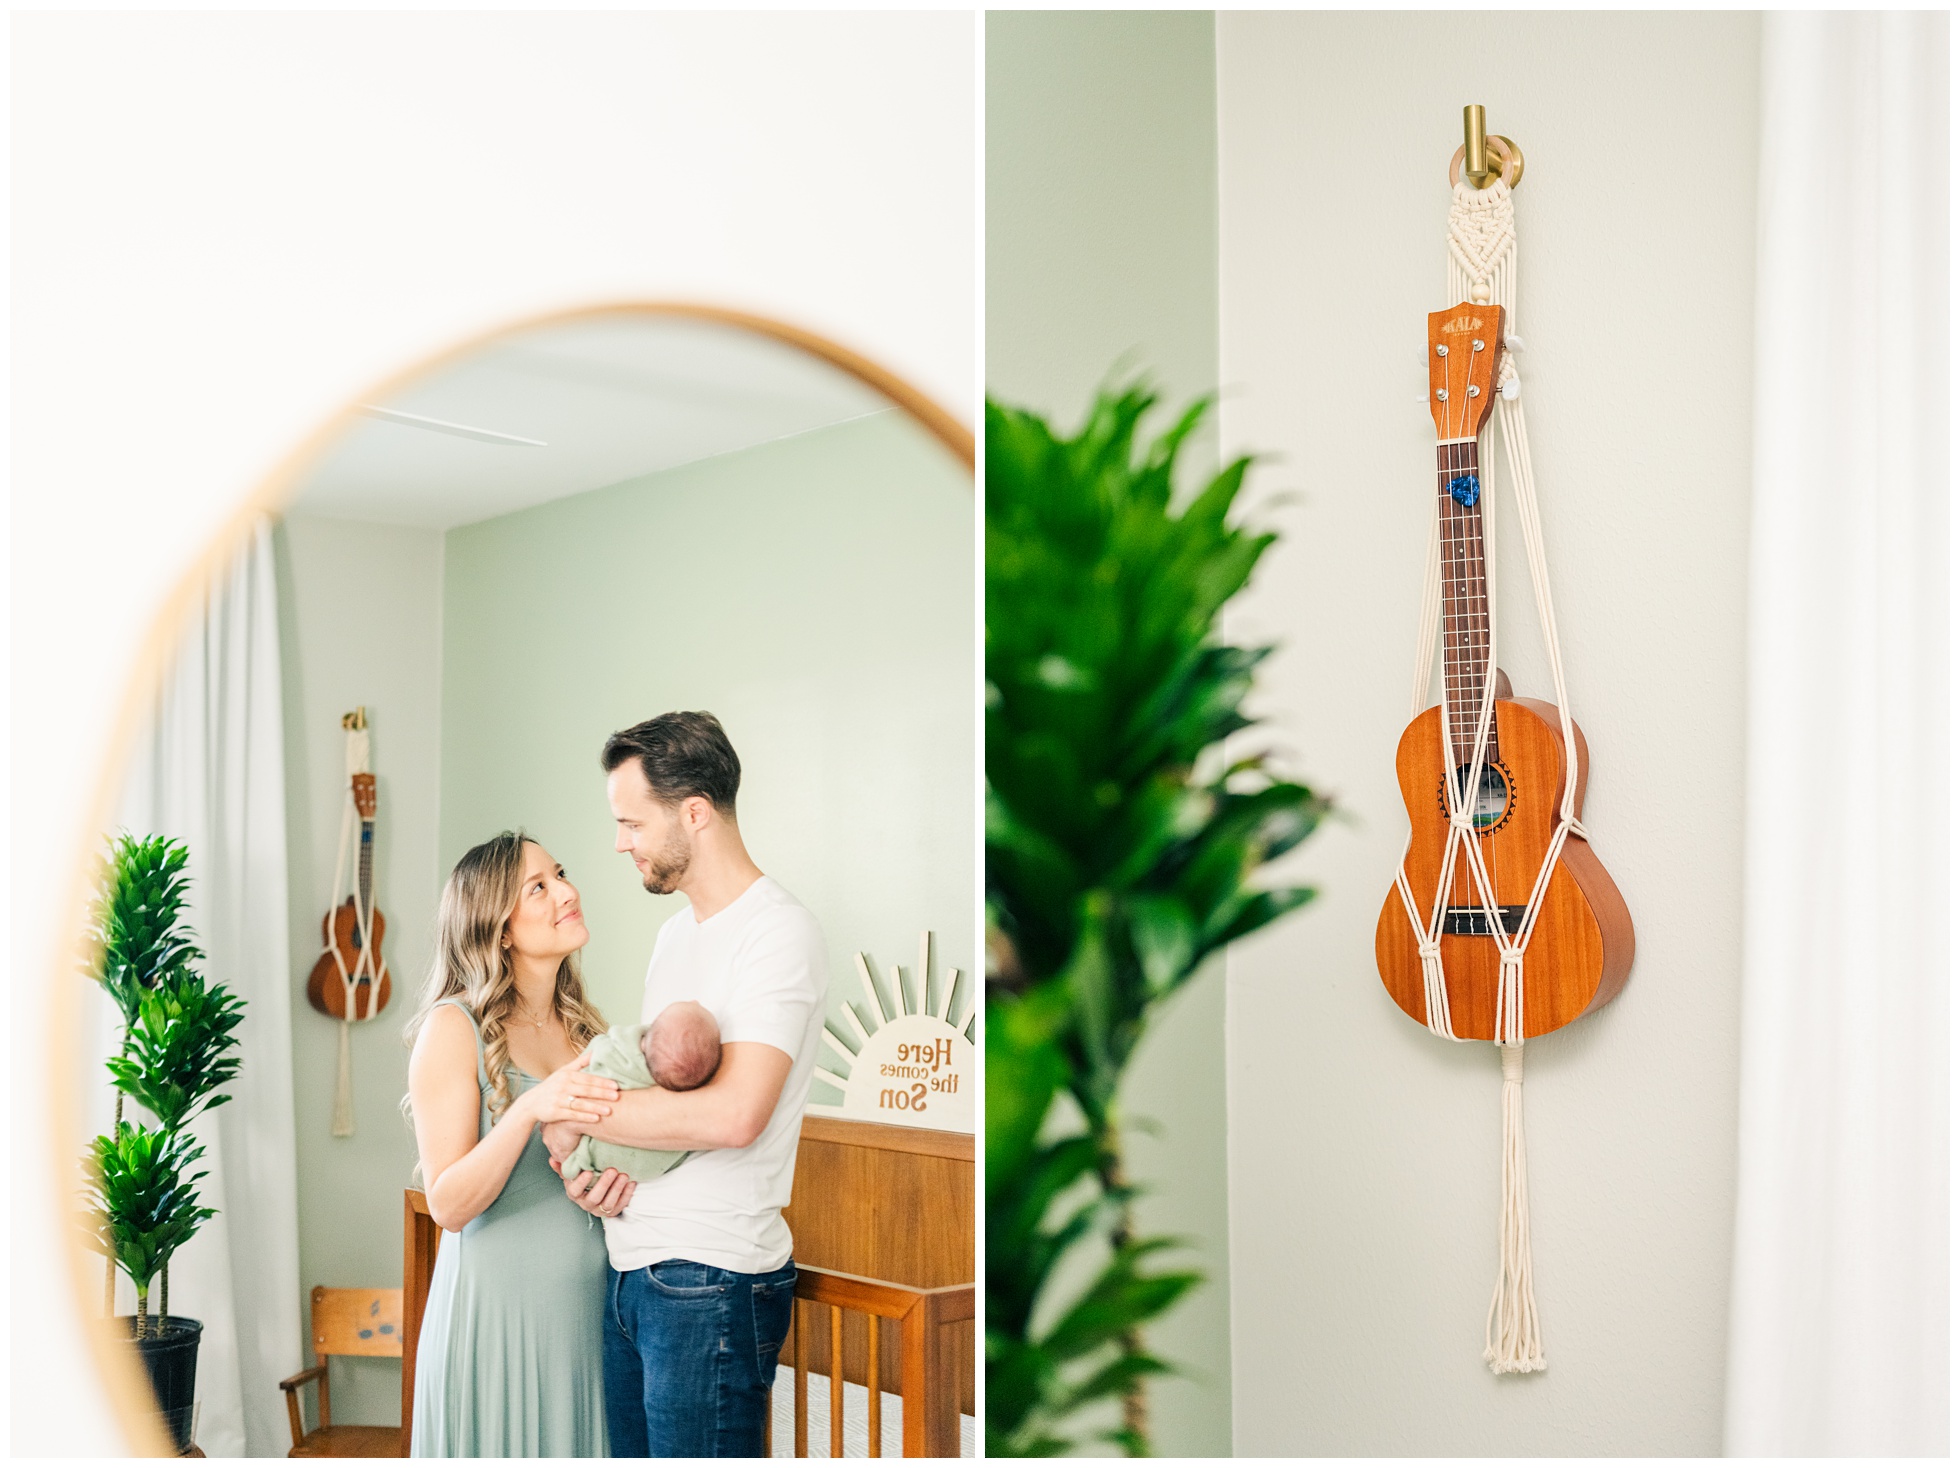 Image of newborn and parents in nursery with hanging guitar